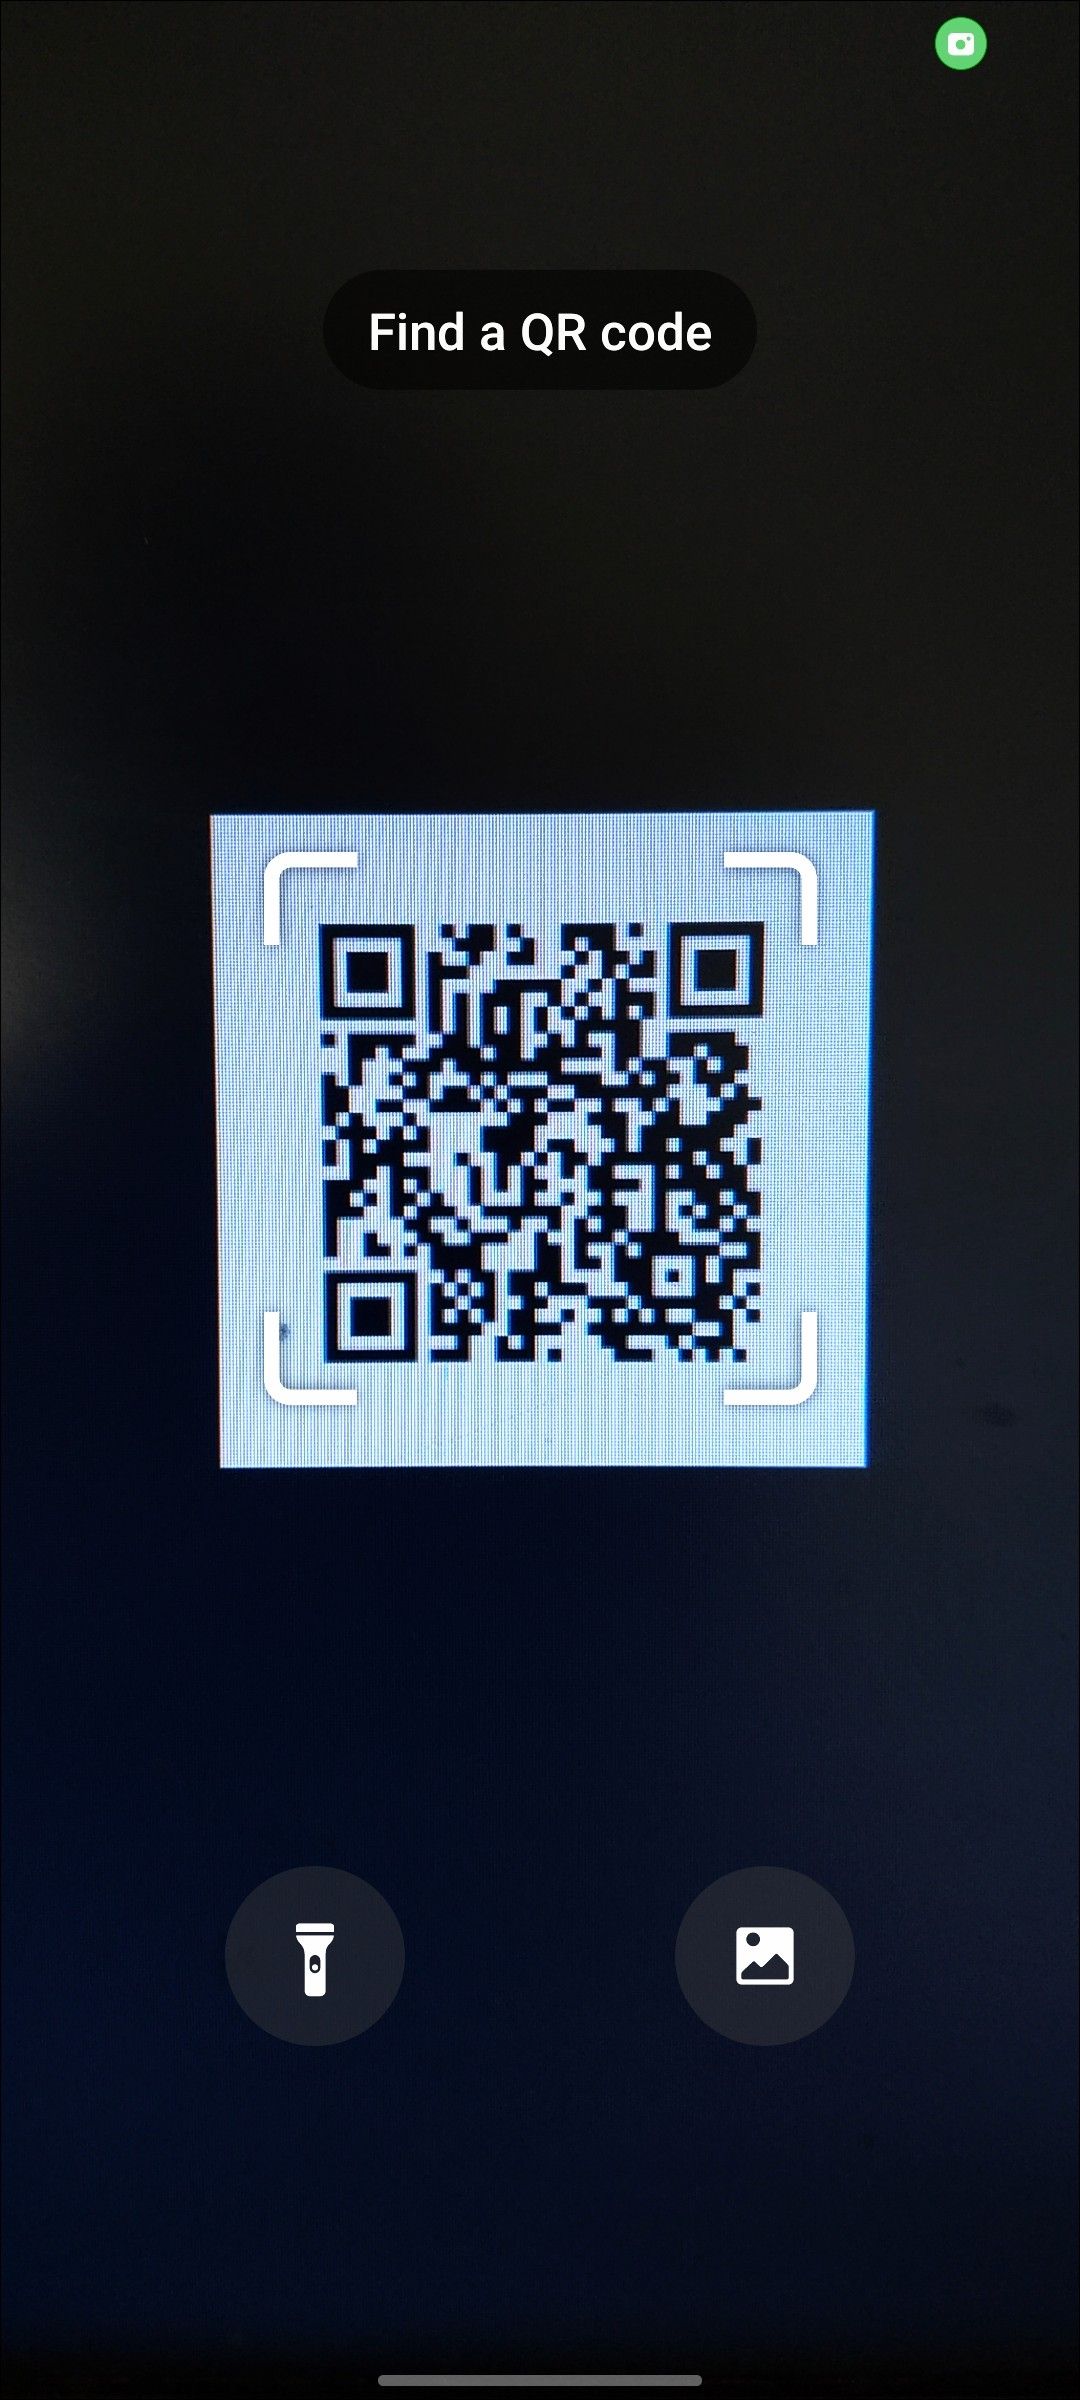 How to Scan a QR Code on a Samsung Galaxy Device